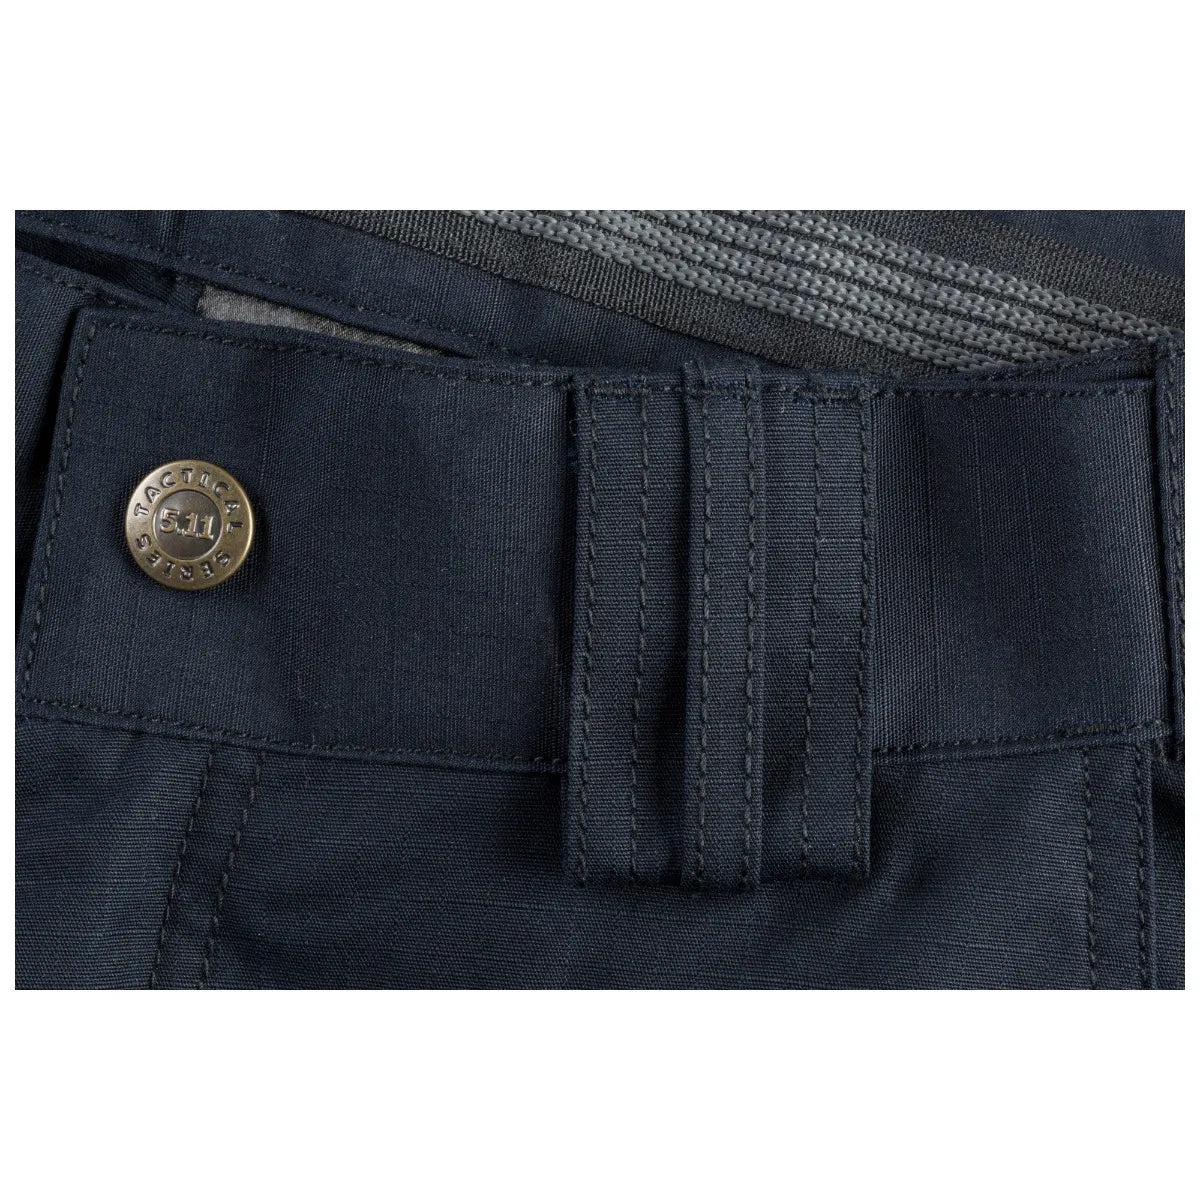 5.11 Tactical Women's TACLITE EMS Pants 64369 - Clothing & Accessories